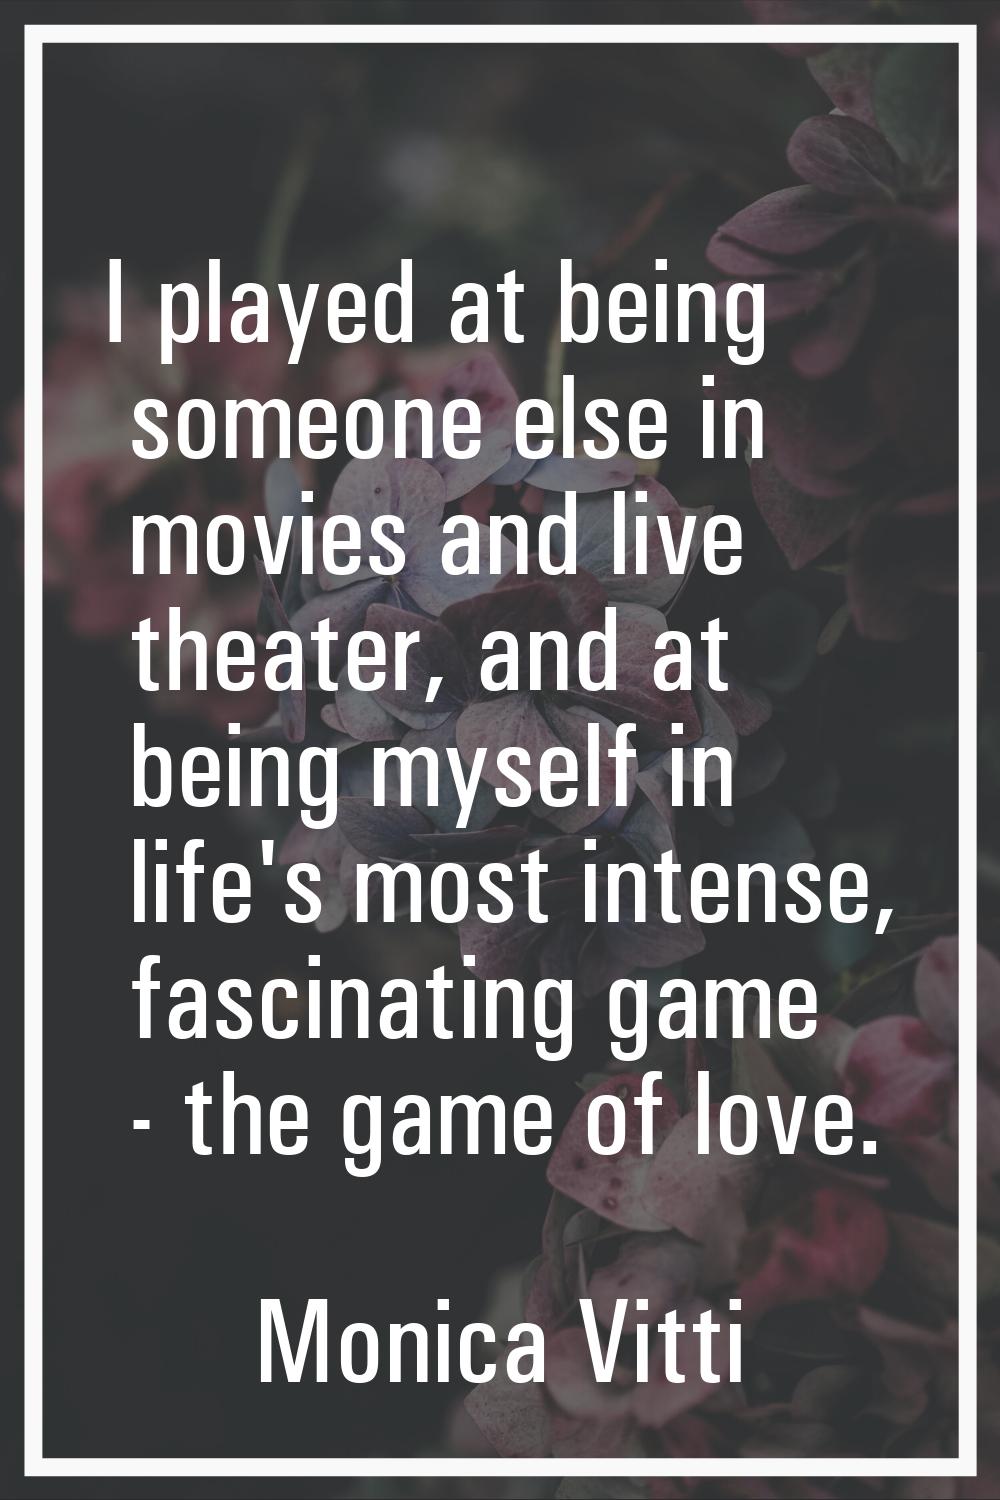 I played at being someone else in movies and live theater, and at being myself in life's most inten